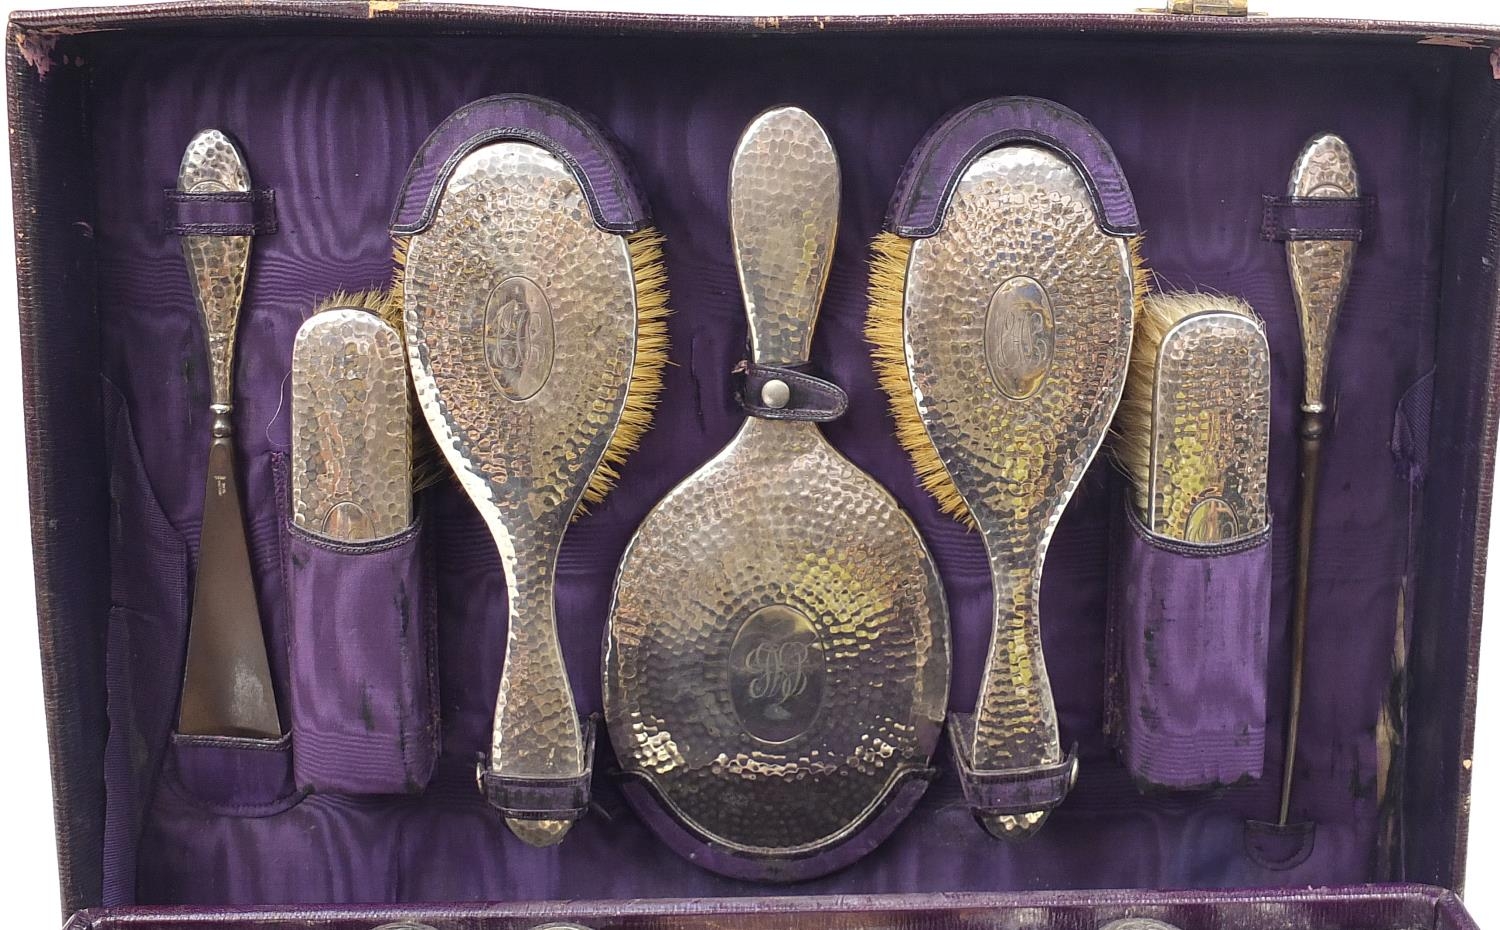 Edwardian purple leather travelling vanity case with silver mounted items including brushes, - Image 2 of 8